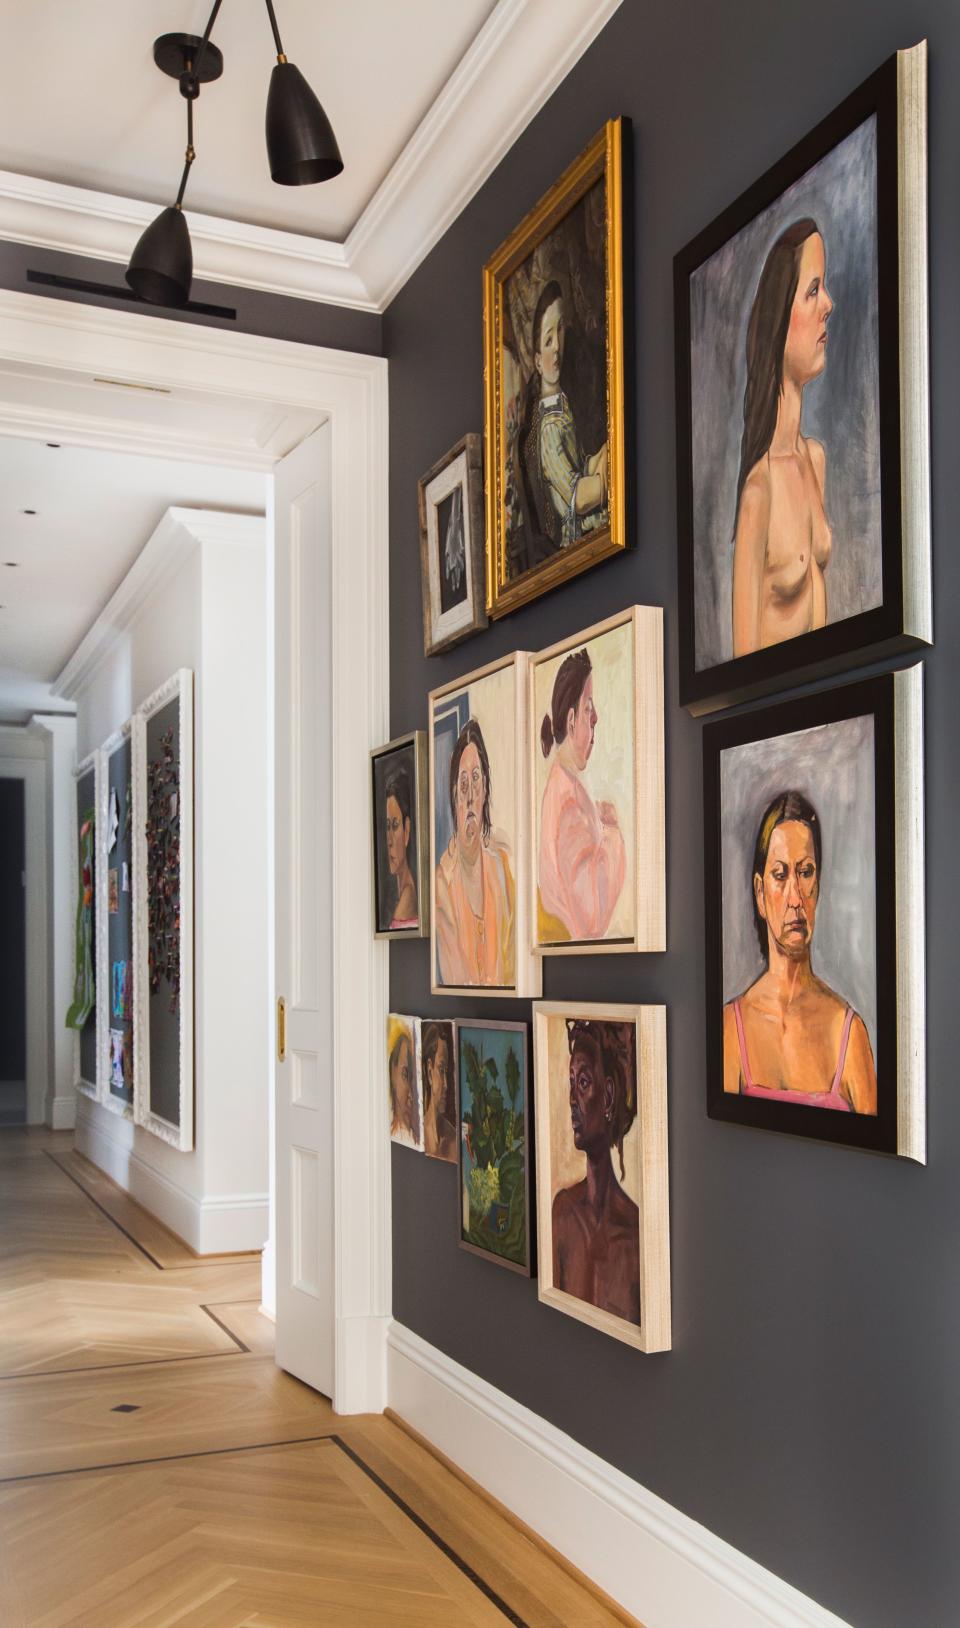 To decorate the hallways of the apartment, Grehl took a cue from Frank Lloyd Wright’s concept of compression and release. “The idea was to create a dark central section and then an explosion of light in the periphery,” she says. All of the portraits on this wall were painted by homeowner Claire Wolinsky, who studied fine arts before becoming a doctor. The custom-installed “Twig” ceiling pendants are from Apparatus.